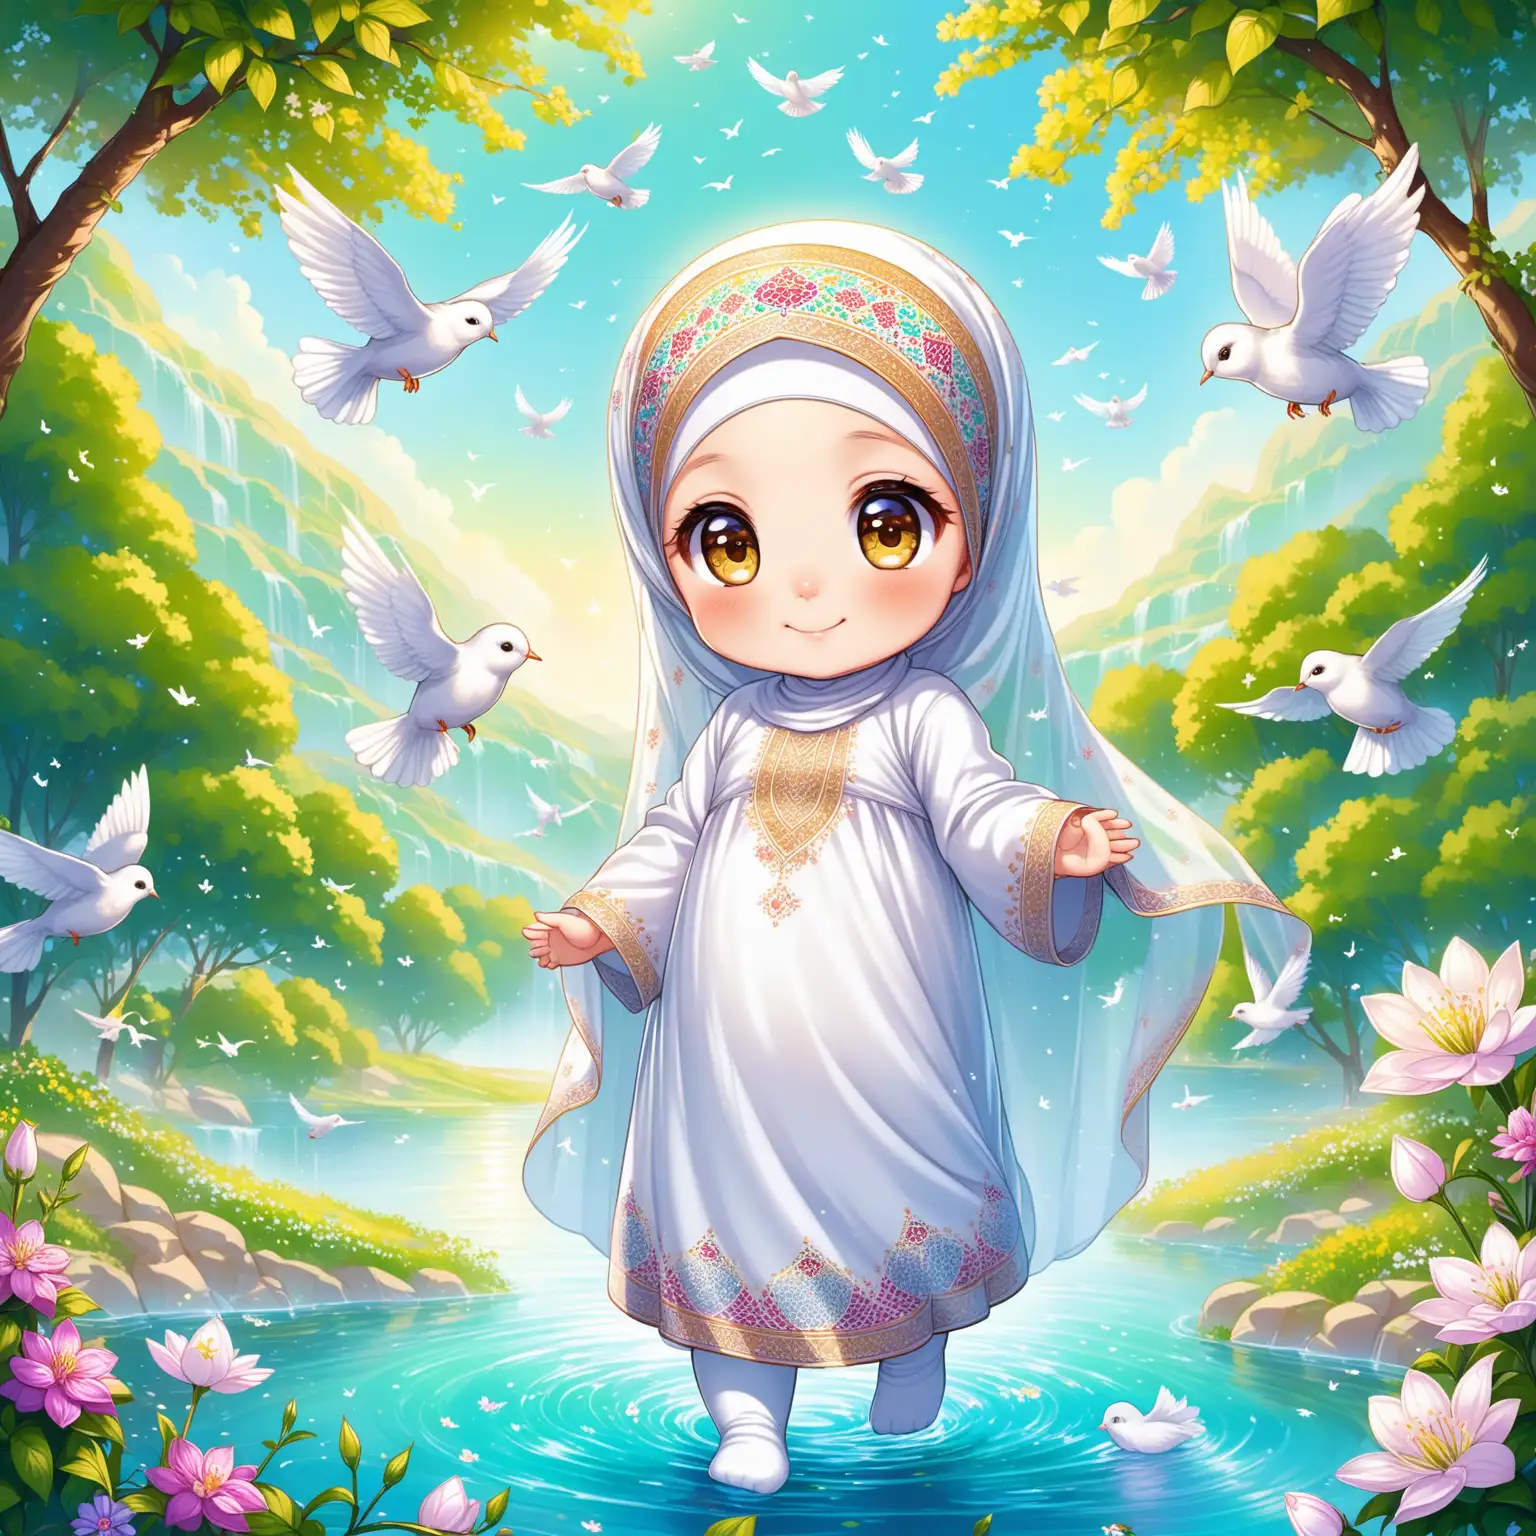 Character Persian little girl(full height, Muslim, wearing Iranian veil, turban, chador, with emphasis no hair nor neck out of veil(Hijab), baby face, smaller eyes, bigger nose, white skin, cute, smiling, wearing socks, clothes full of Persian designs, heavenly girl).

Atmosphere flowing water from the spring with flowers, nightingales and flying birds in spring.